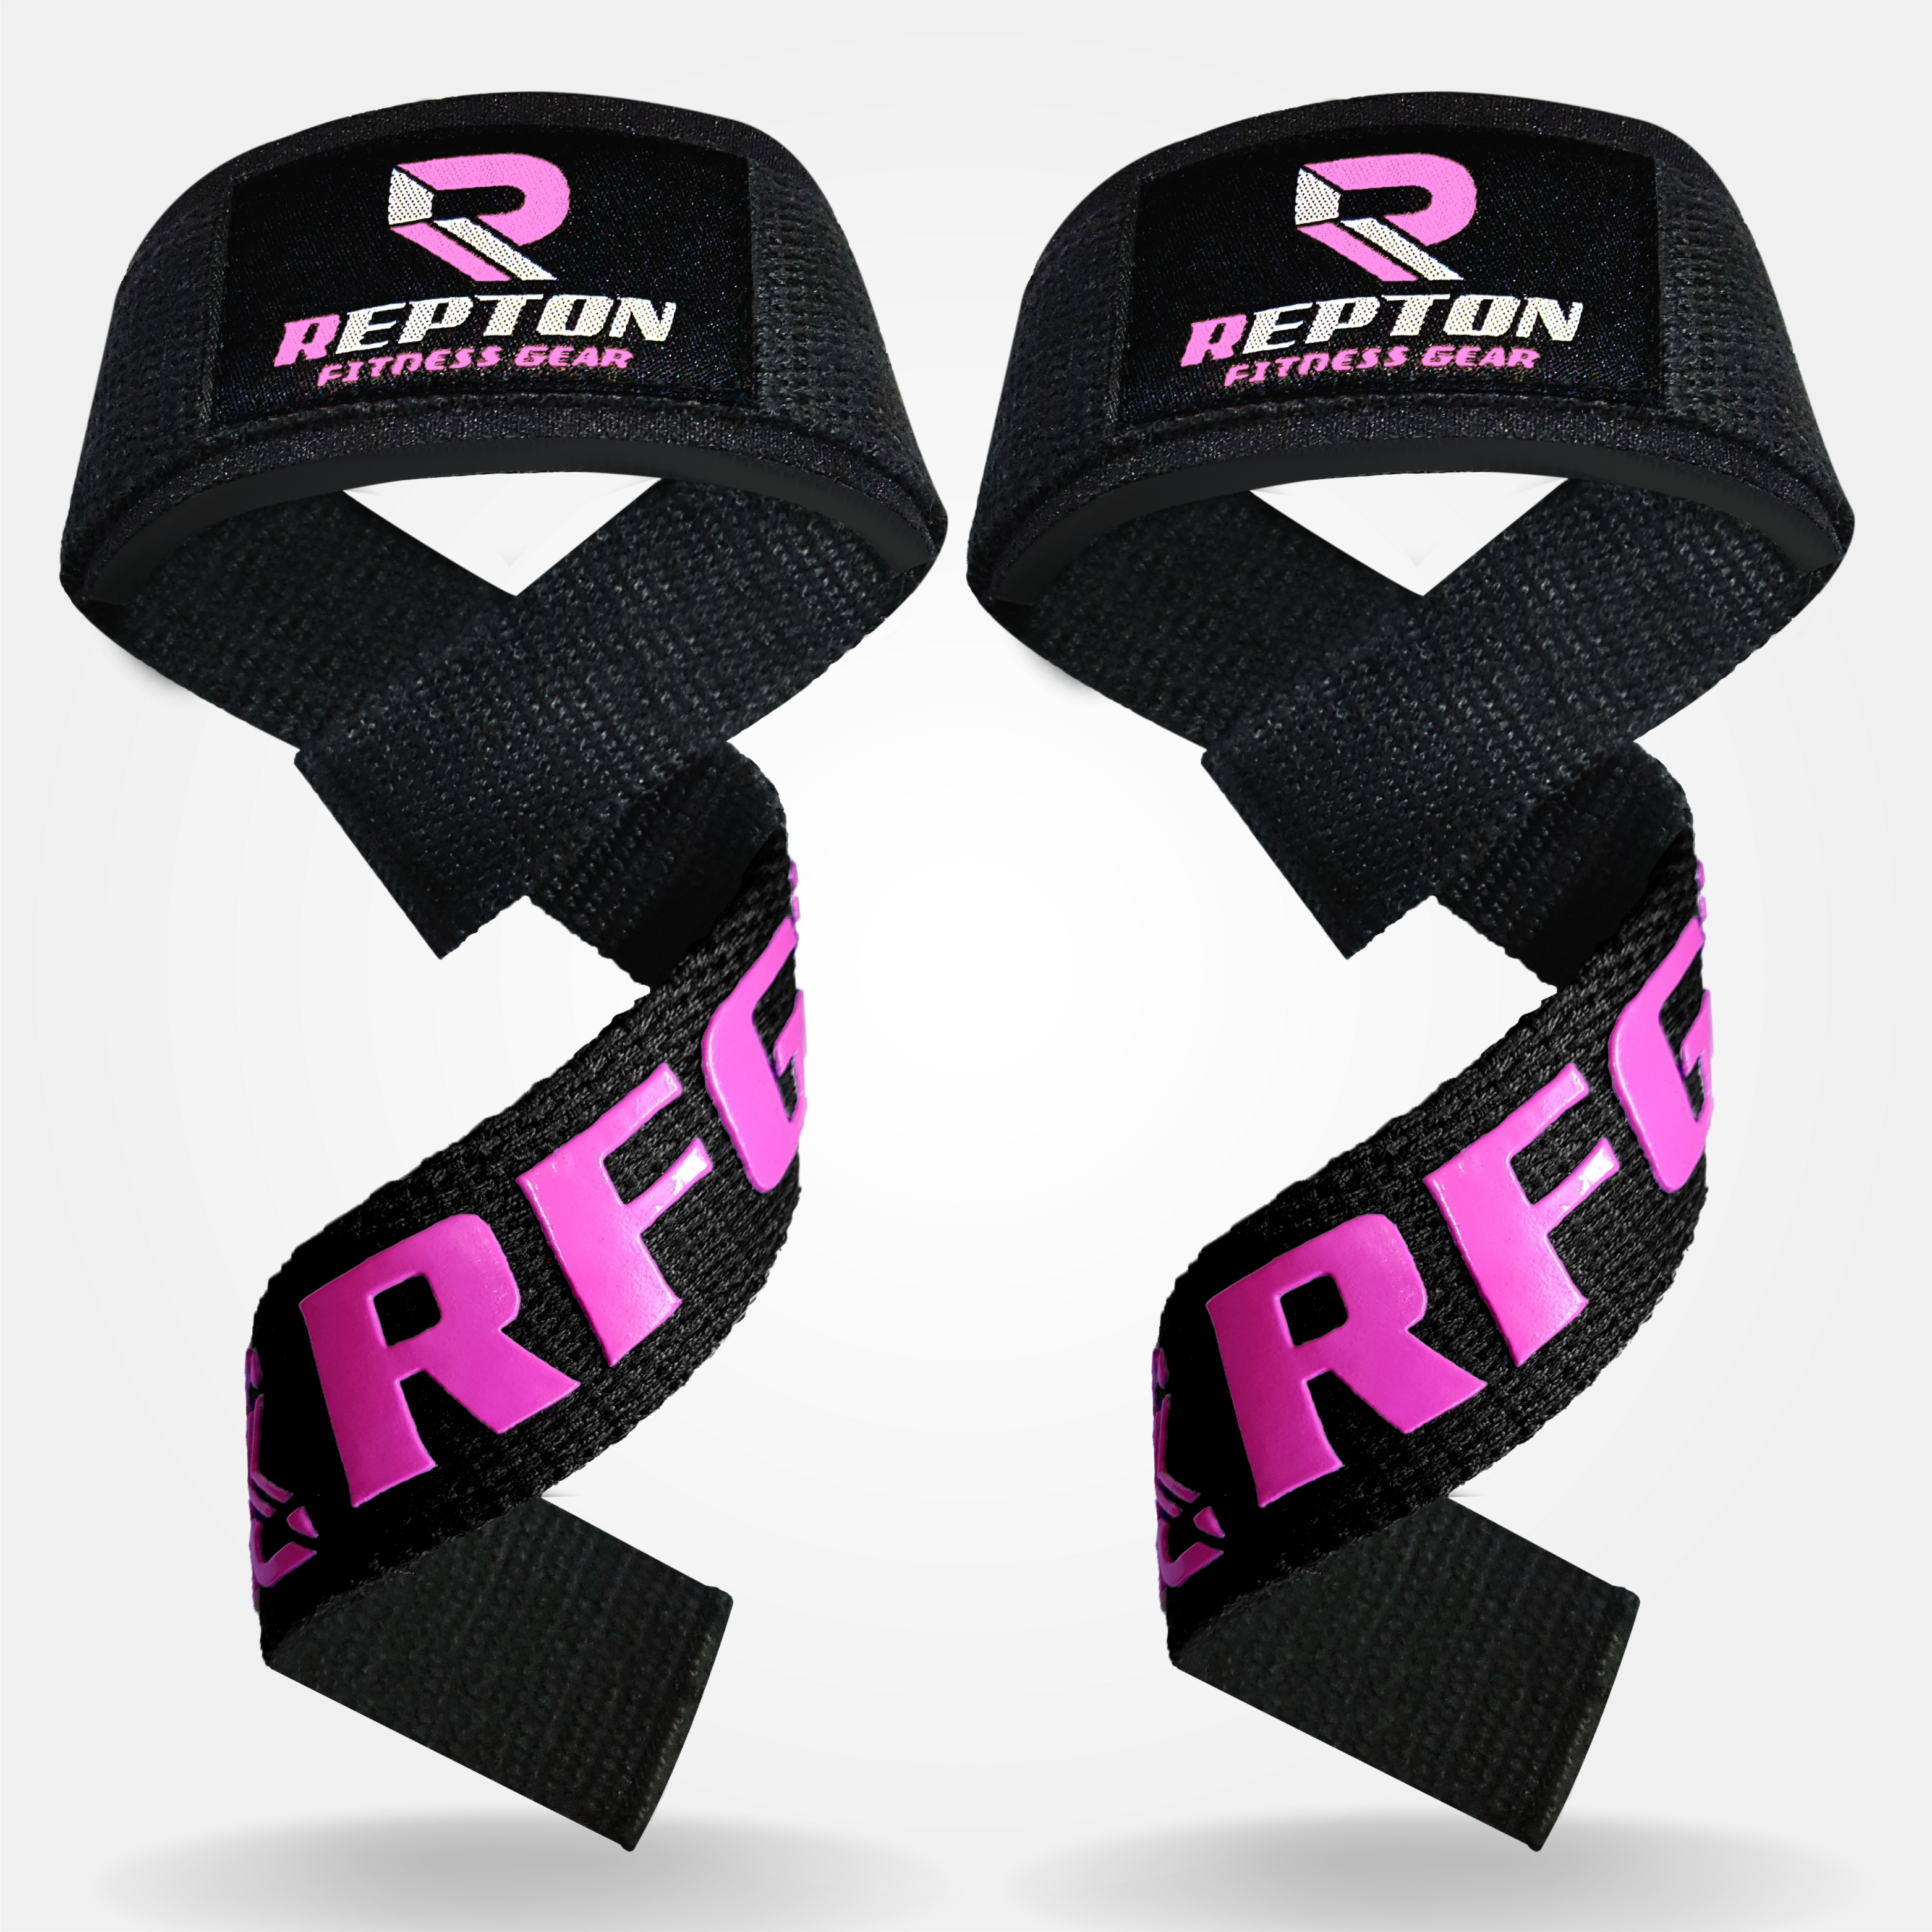 Weight Lifting Straps, Powerlifting Deadlifting, Anti Slip 60CM Hand Bar Grip, 5MM Neoprene Wrist Support, for Heavy Duty Bodybuilding Repton Fitness and Boxing Gears